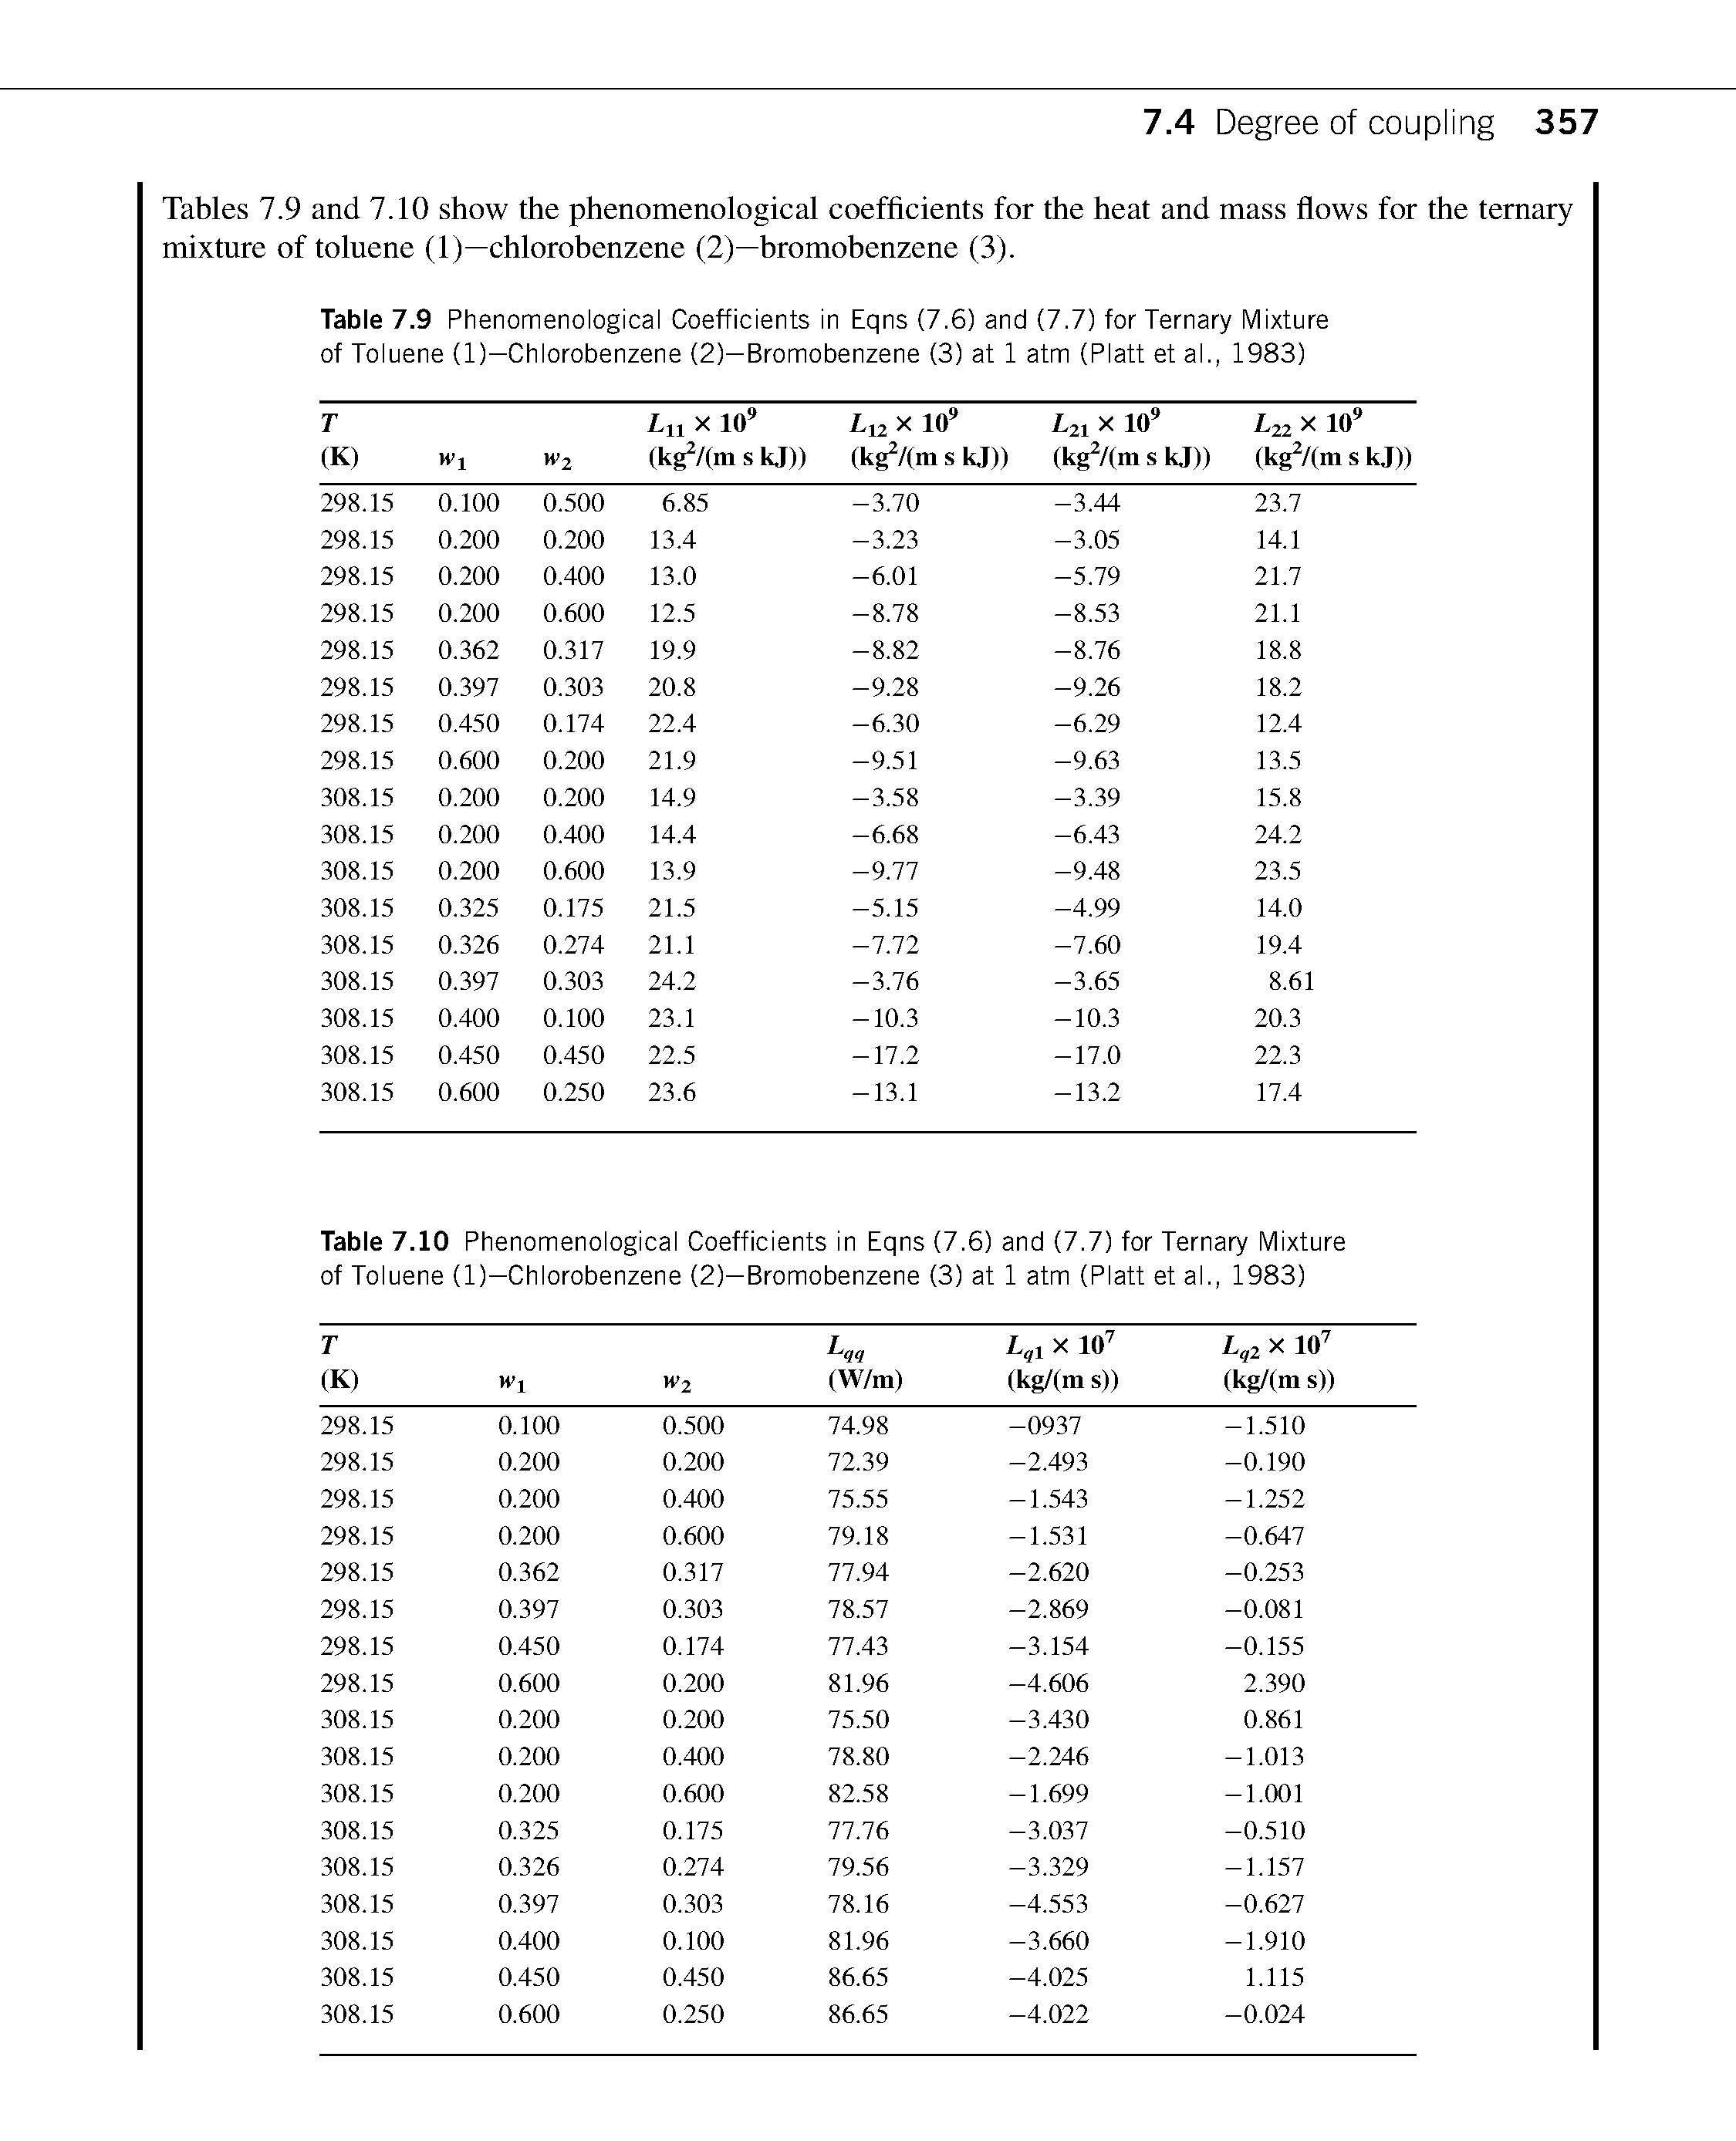 Tables 7.9 and 7.10 show the phenomenological coefficients for the heat and mass flows for the ternary mixture of toluene (1)—chlorobenzene (2)—bromobenzene (3).